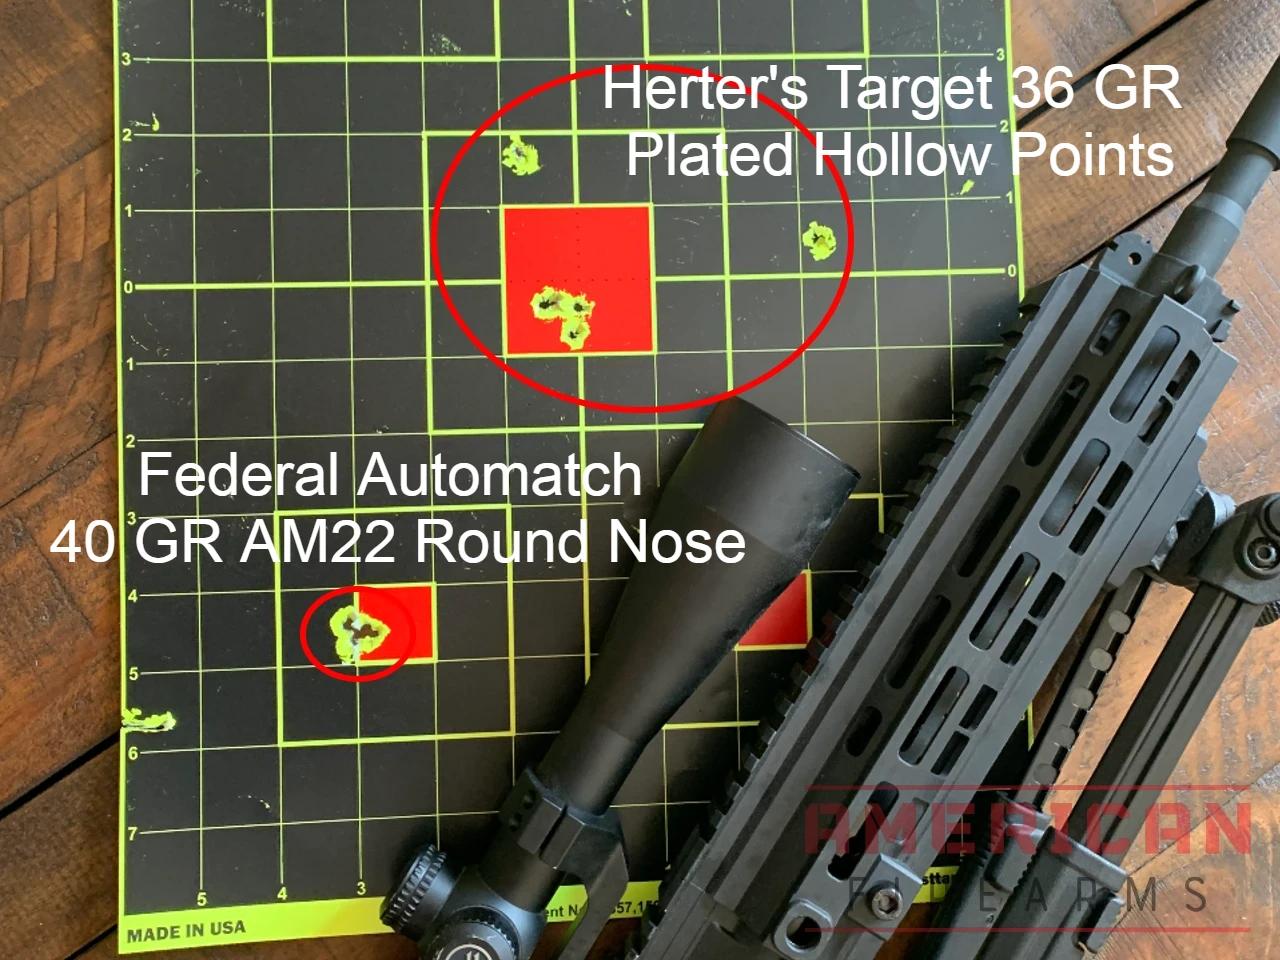 For this review I shot both Herter's 36 GR Bulk Pack Target Hollow Points (top) and Federal AM22 40 GR at 20 yards.